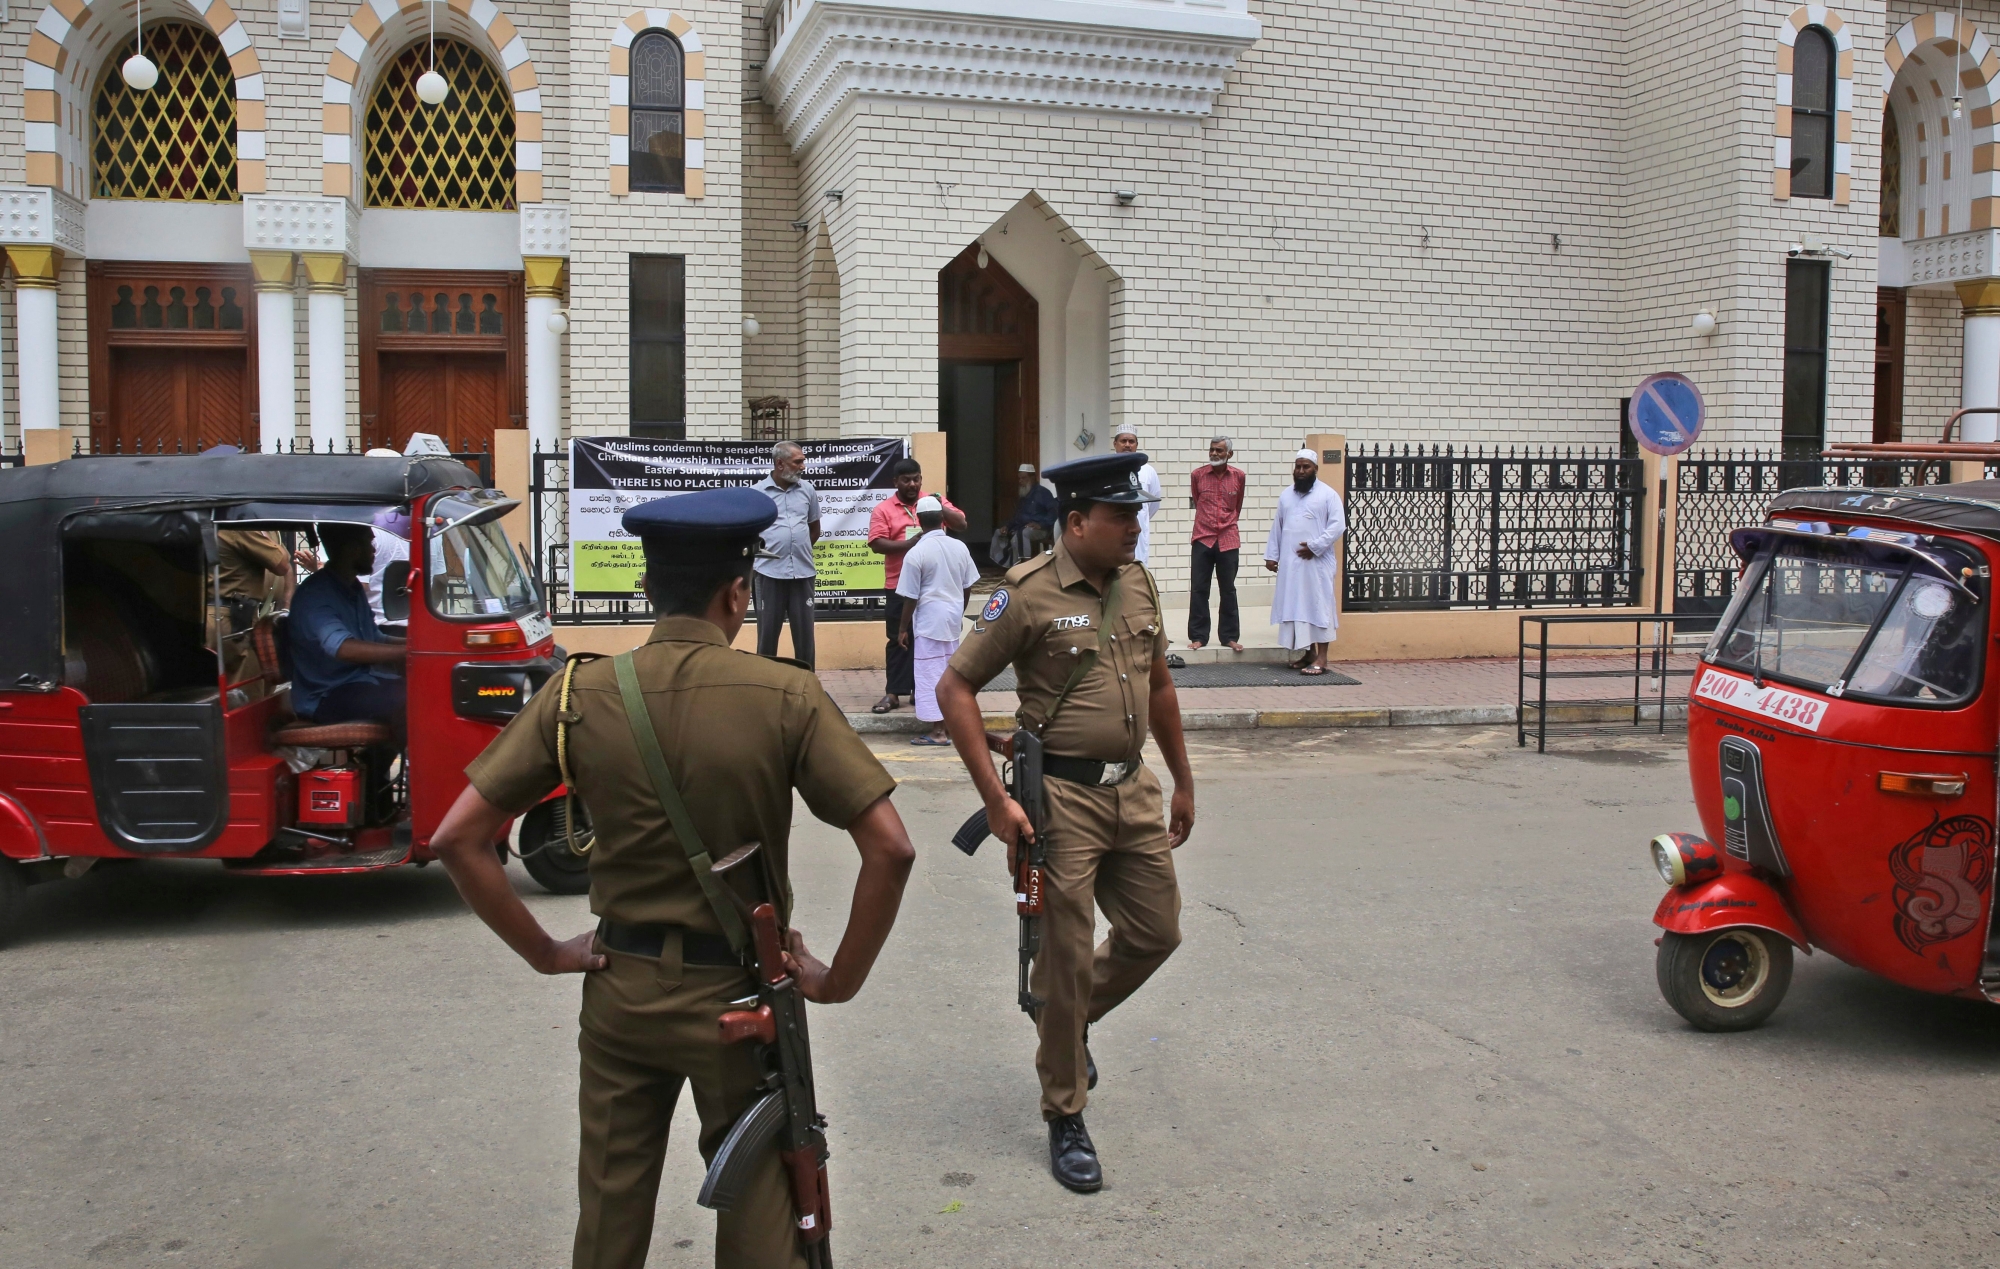 Sri Lankan policemen stand guard outside a mosque before the Friday prayers, in Colombo, Sri Lanka, Friday, April 26, 2019. Across Colombo, there was a visible increase of security as authorities warned of another attack and pursued suspects that could have access to explosives. Authorities had told Muslims to pray at home rather than attend communal Friday prayers that are the most important religious service for the faithful. At one mosque in Colombo where prayers were still held, police armed with Kalashnikov assault rifles stood guard outside. (AP Photo/Manish Swarup) Sri Lanka Blasts